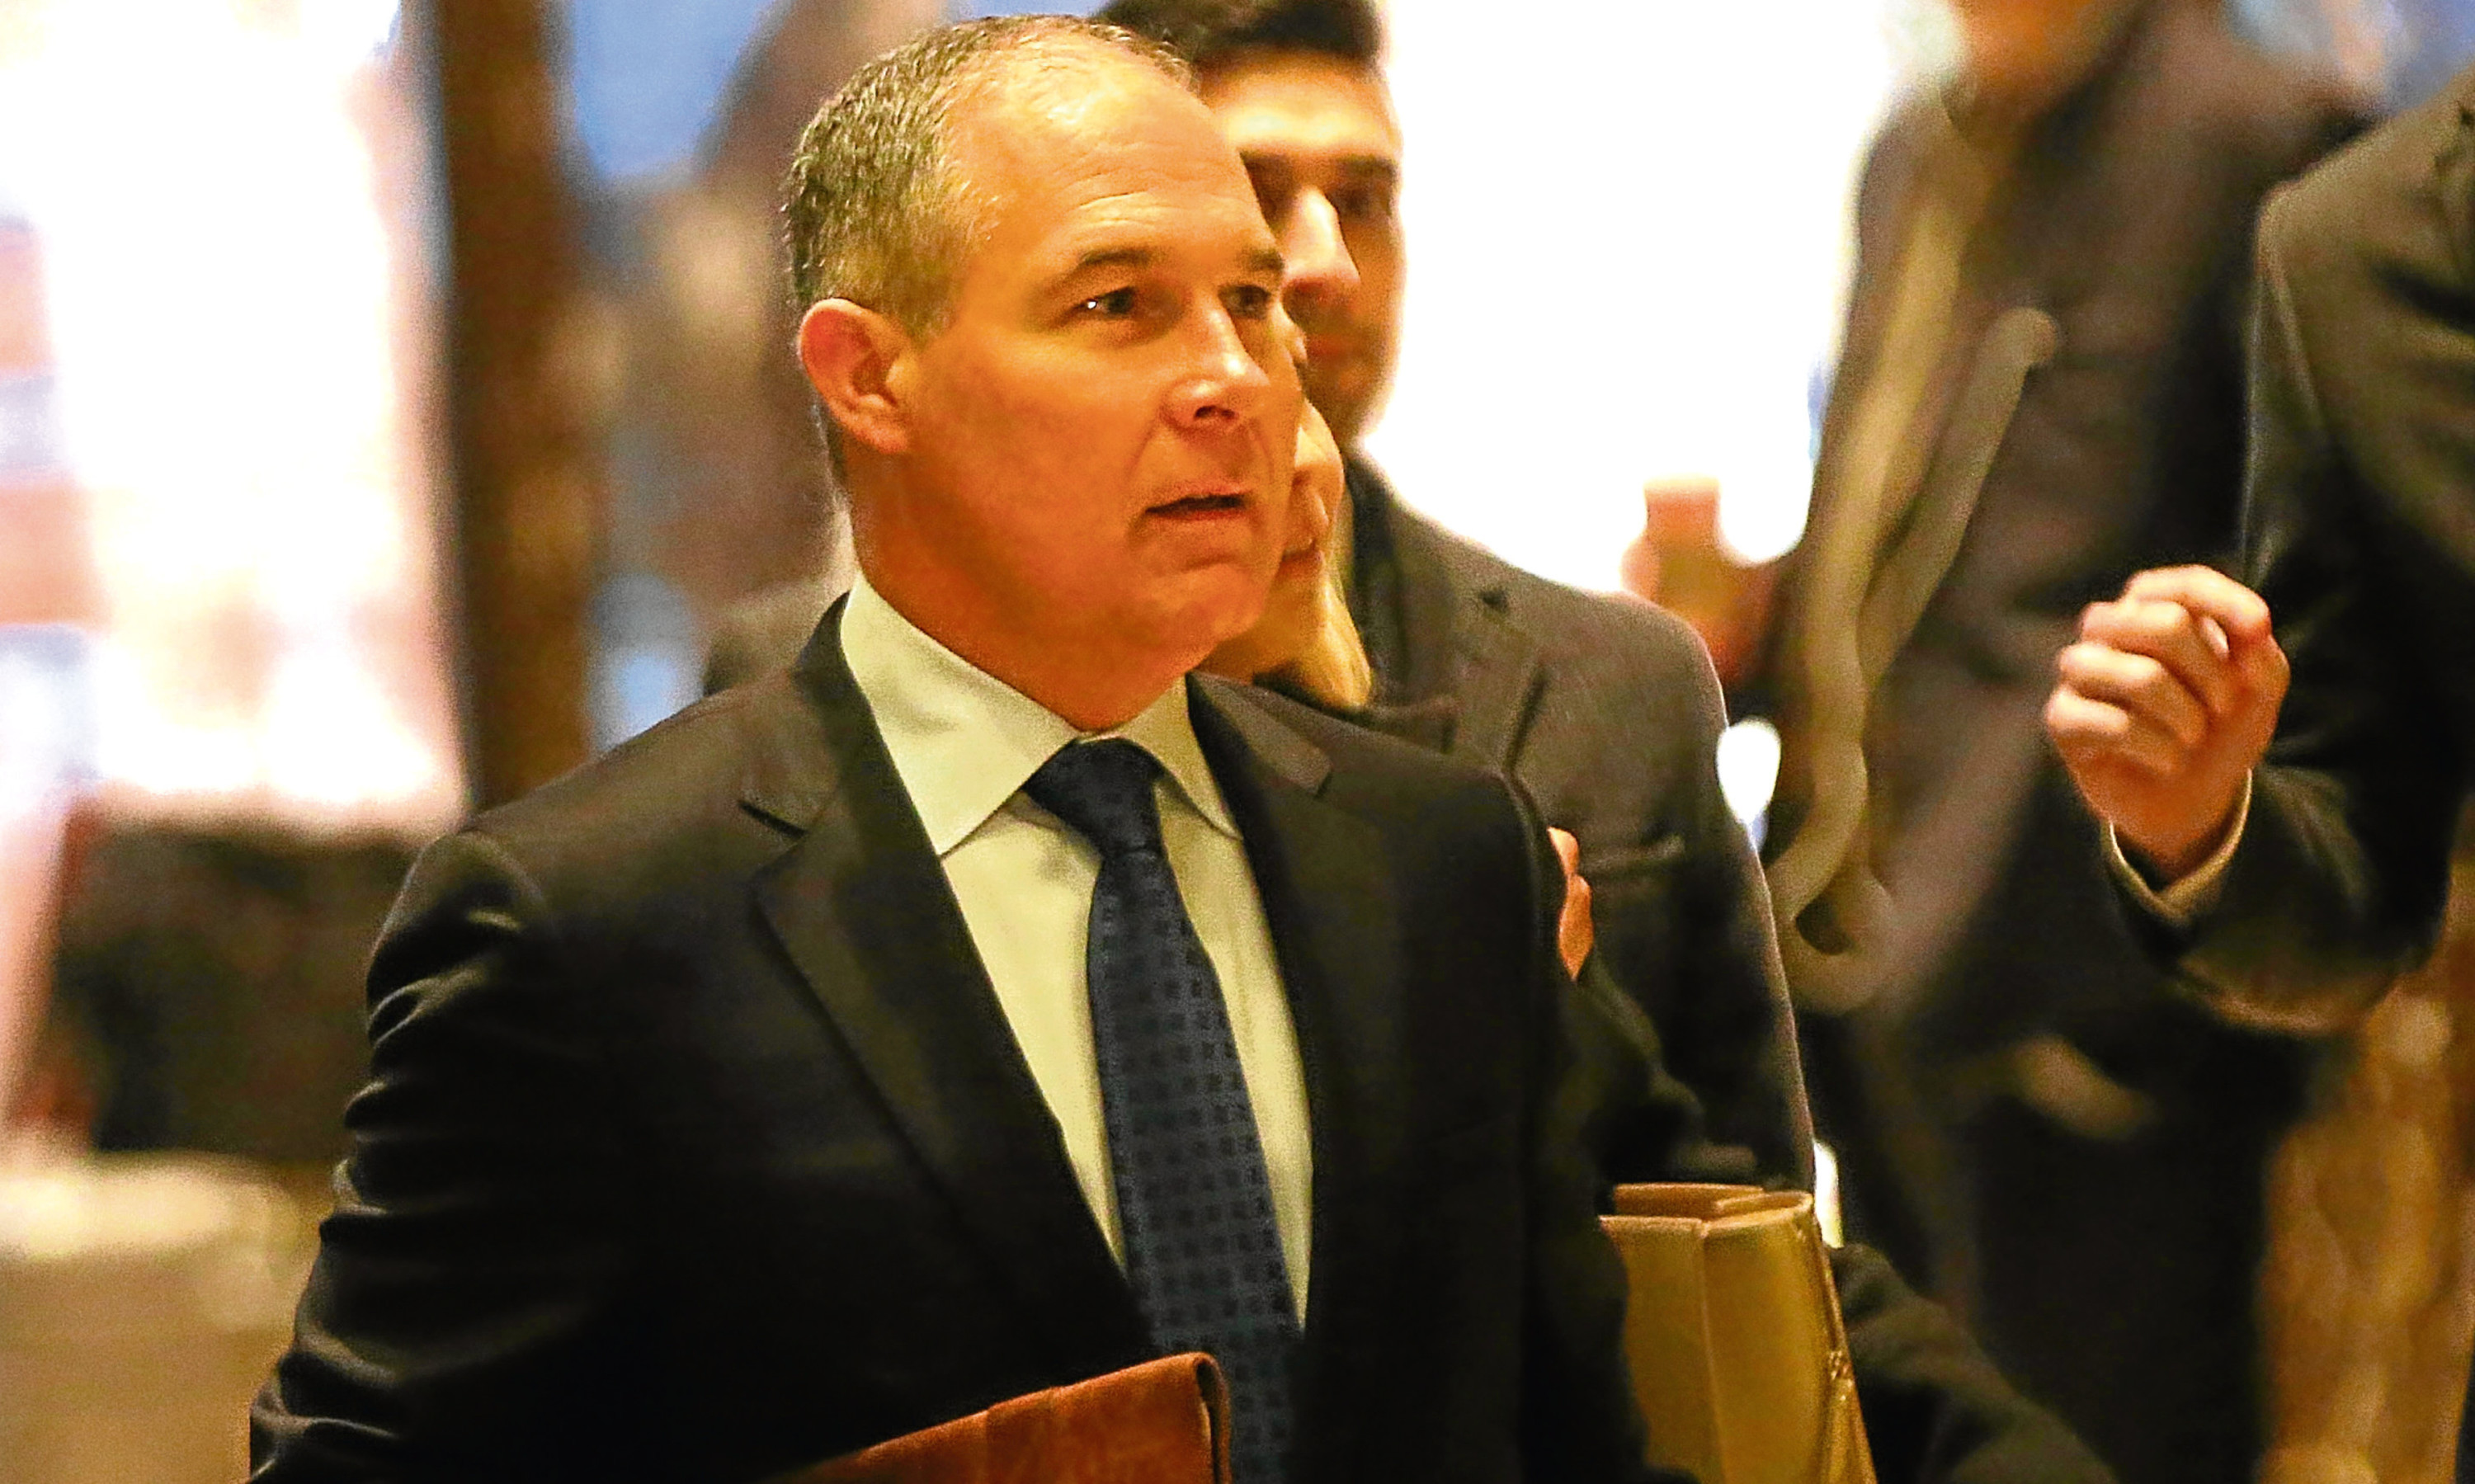 Scott Pruitt is in the process of suing the American Environmental Protection Agency  which he has just been made head of by Donald Trump.